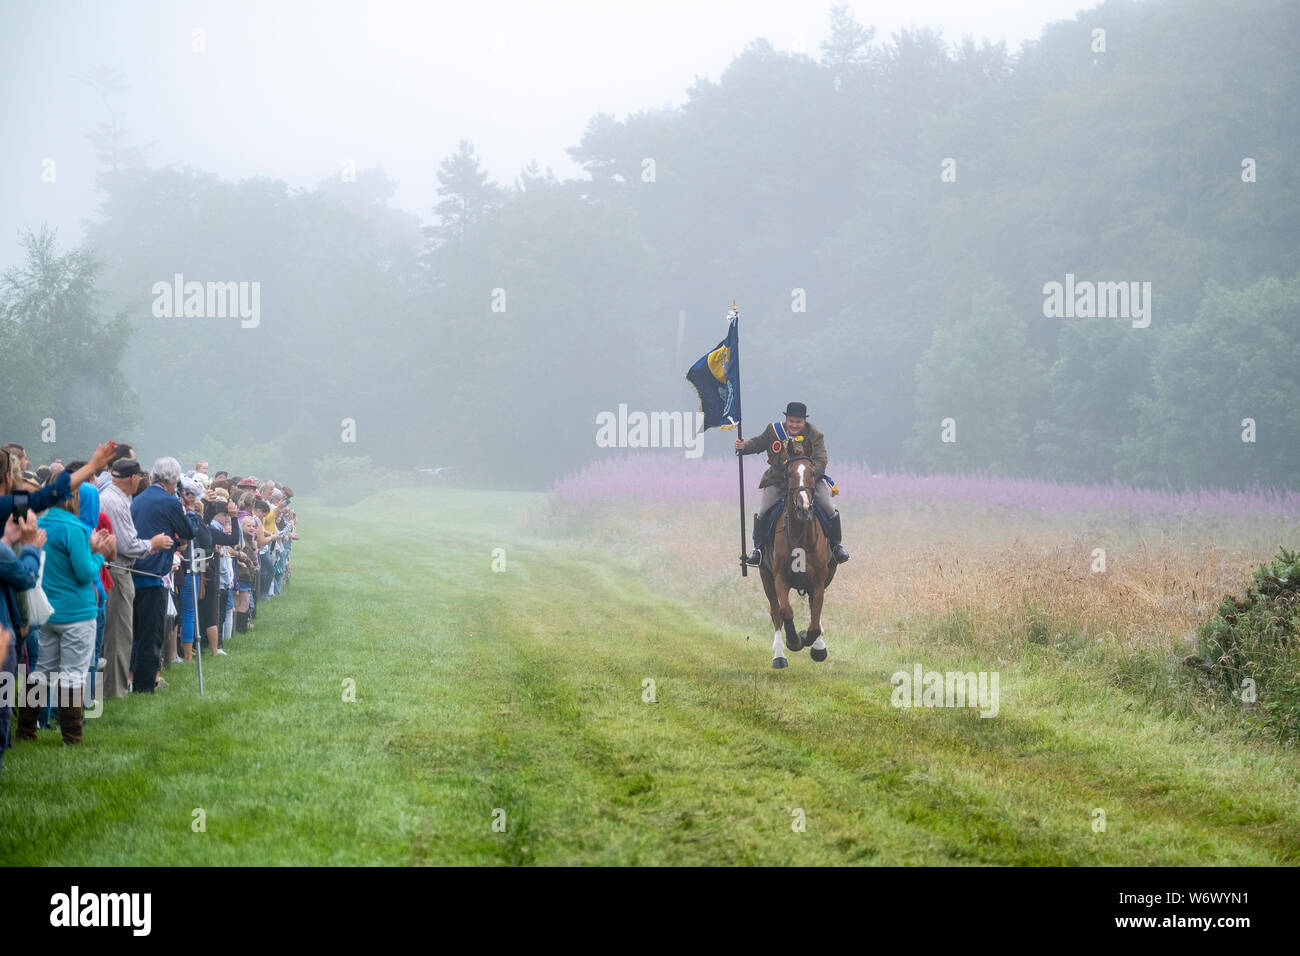 Lauder, SCOTLAND - August 03: Lauder Common Riding 2019. Christopher Purves, Lauder Cornet 2019 with the Burgh Standard galloping up the Golf Course at the start of the ride out. Lauder Common Riding is part of a tradition of Common Ridings and similar festivals in the Borders and south of Scotland. The main event is a Riding of over 300 horses around the Common land of Lauder. The main Rideout is always the first Saturday in August and is the culmination of a whole week of events. Lauder Common Riding is proud to be one of the original and oldest Border Common Ridings. Stock Photo